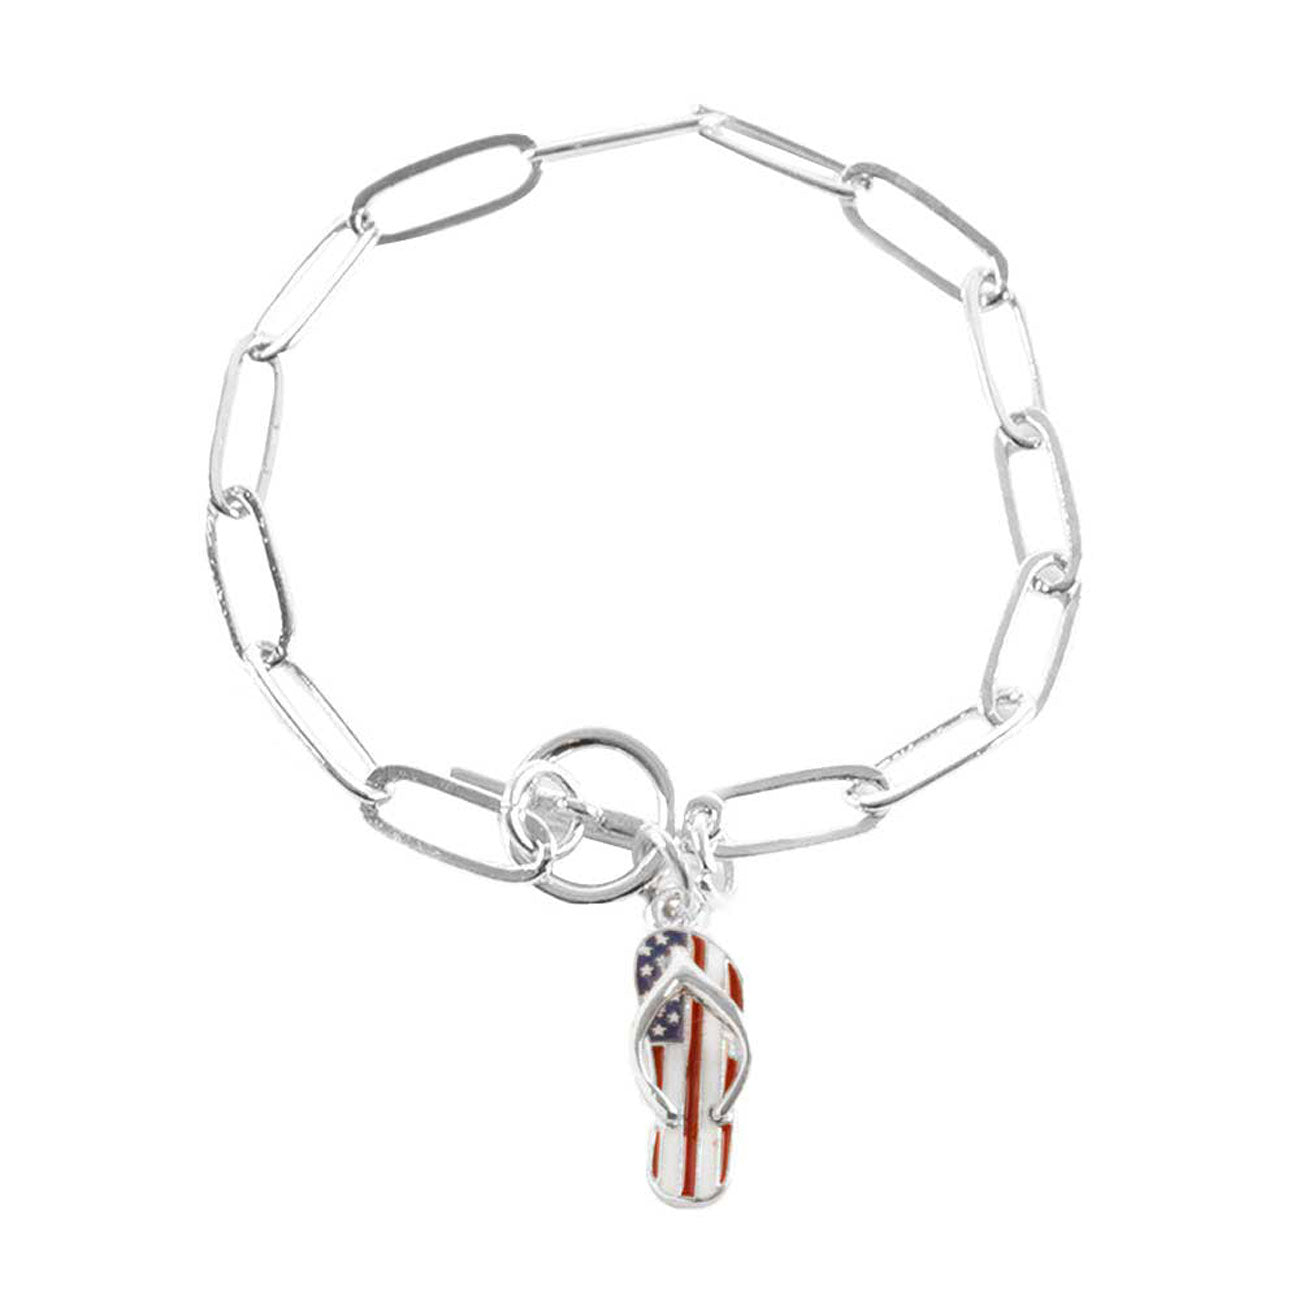 Rhodium American USA Flag Flip Flop Charm Toggle Bracelet, add a statement to your outfit with this beautiful accessory. It’s has beautiful USA Flag charm in our patriotic vibrant colors. Perfect of any time day or night, great for election day, national holiday, show how much you love this country.  